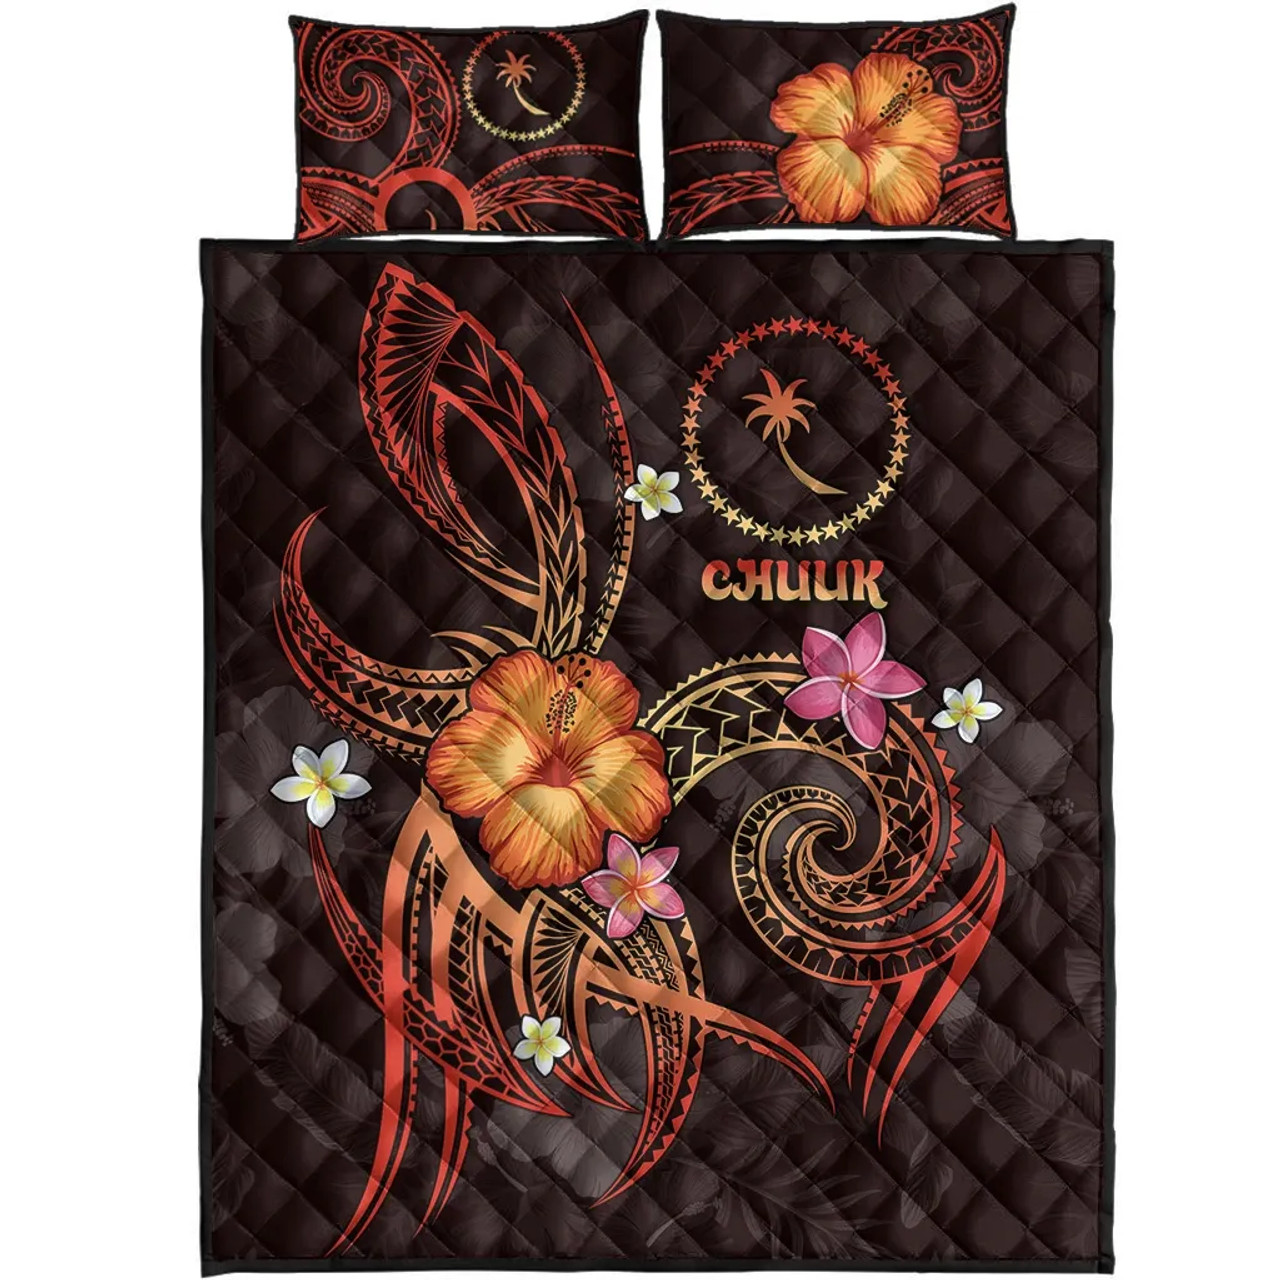 Chuuk Polynesian Quilt Bed Set - Legend of Chuuk (Red) 2